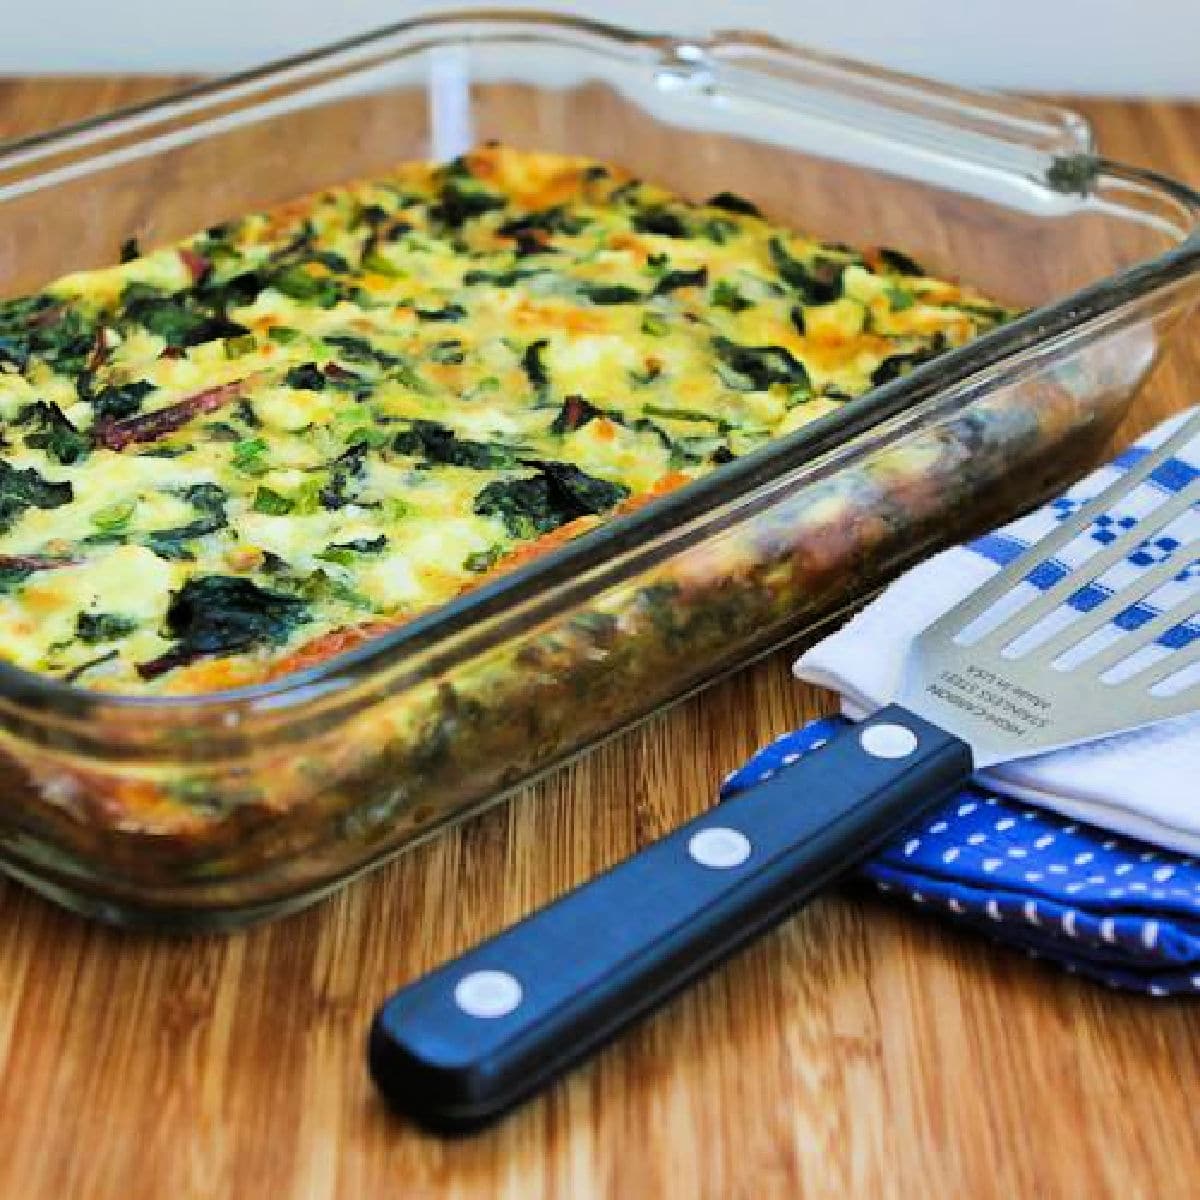 Square image for Swiss Chard, Mozzarella, and Feta Egg Bake shown in baking dish.